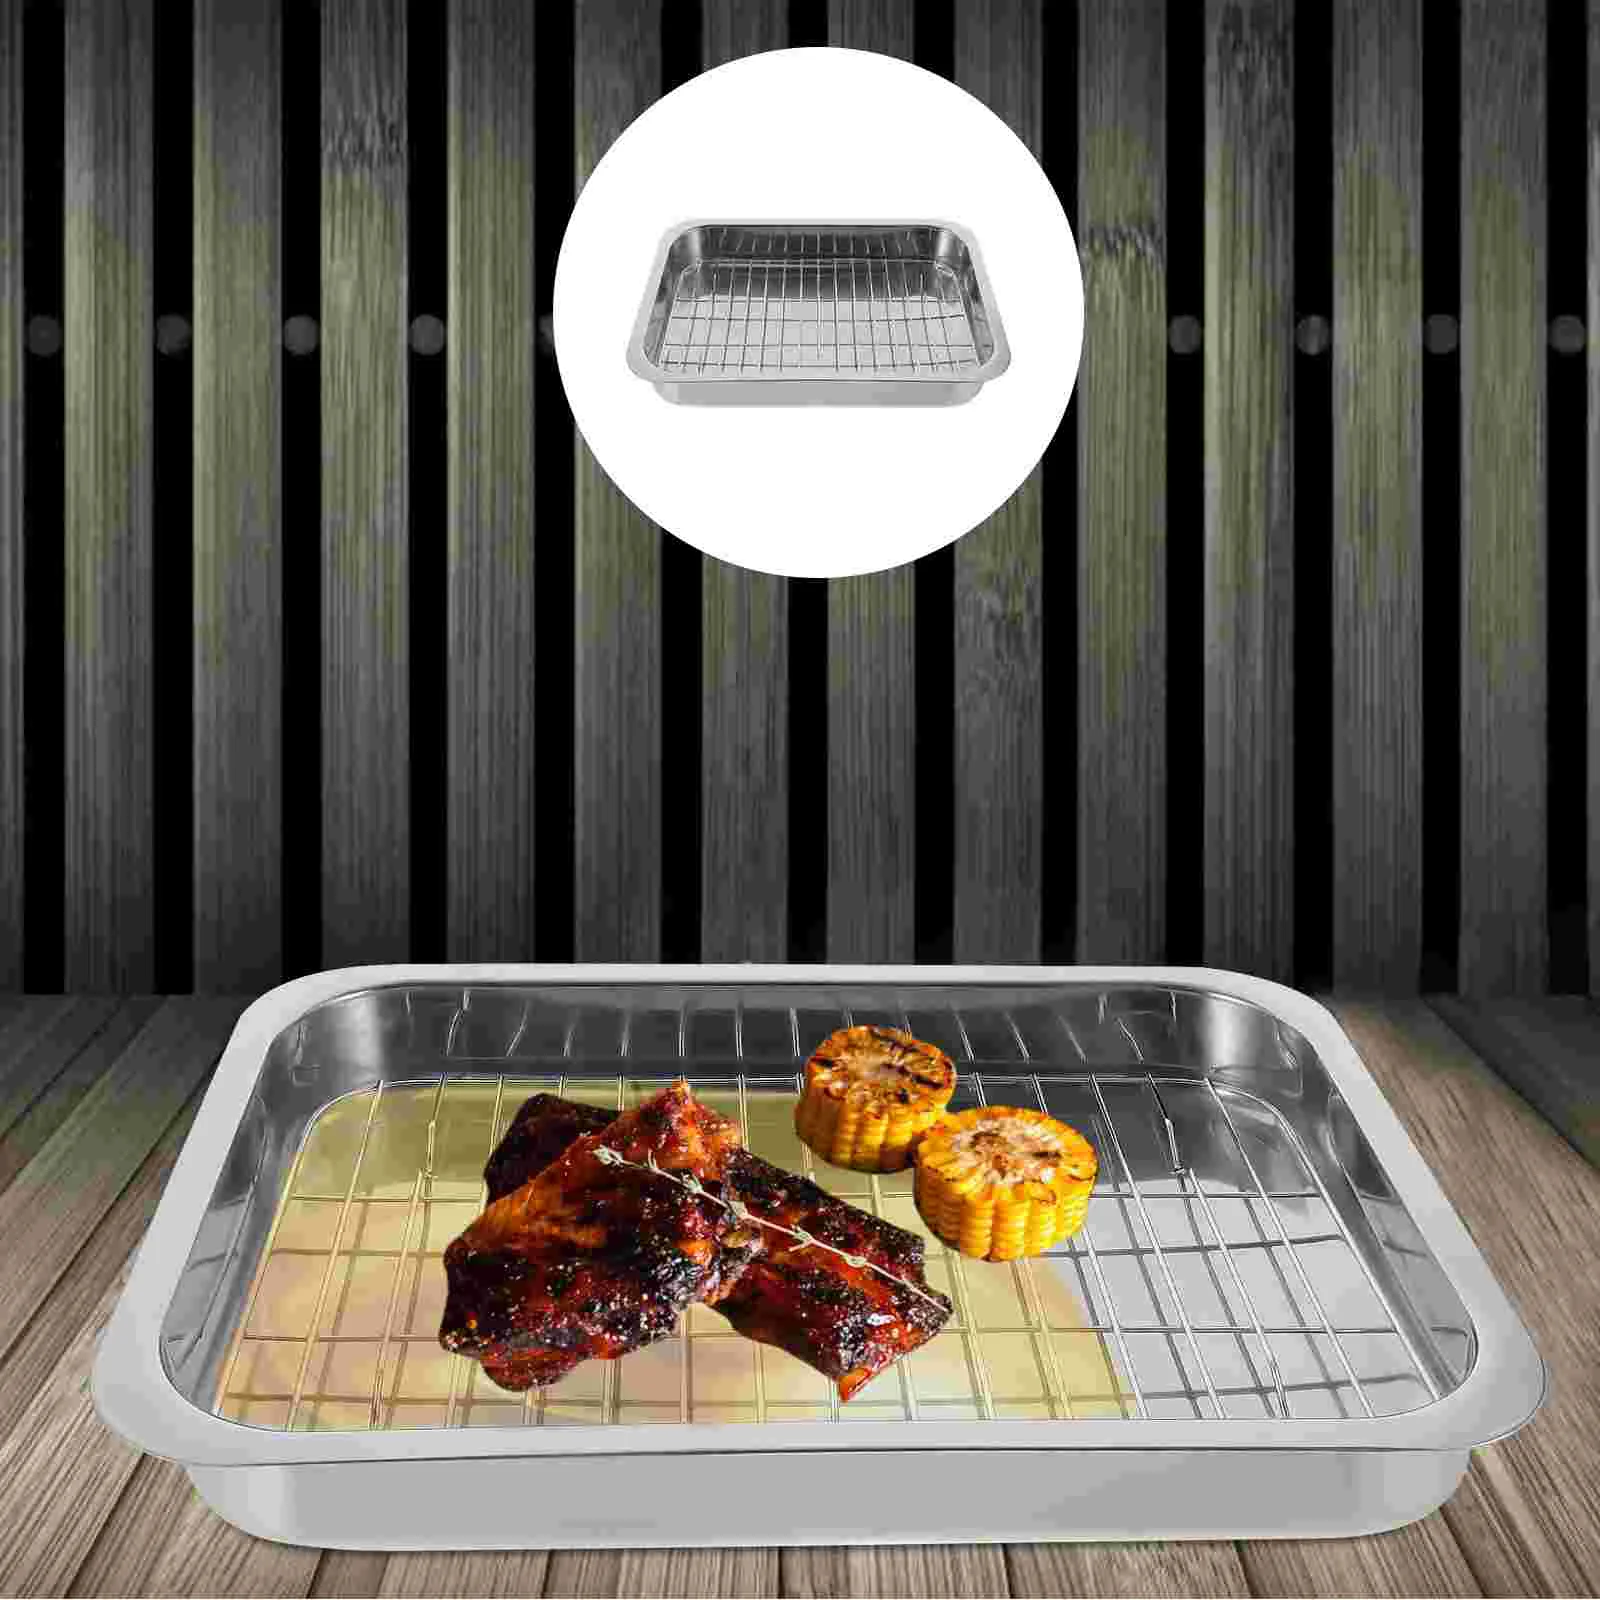 

Cooling Rack Stainless Steel Bakeware Toaster Oven Turkey Roaster Pan Tray with